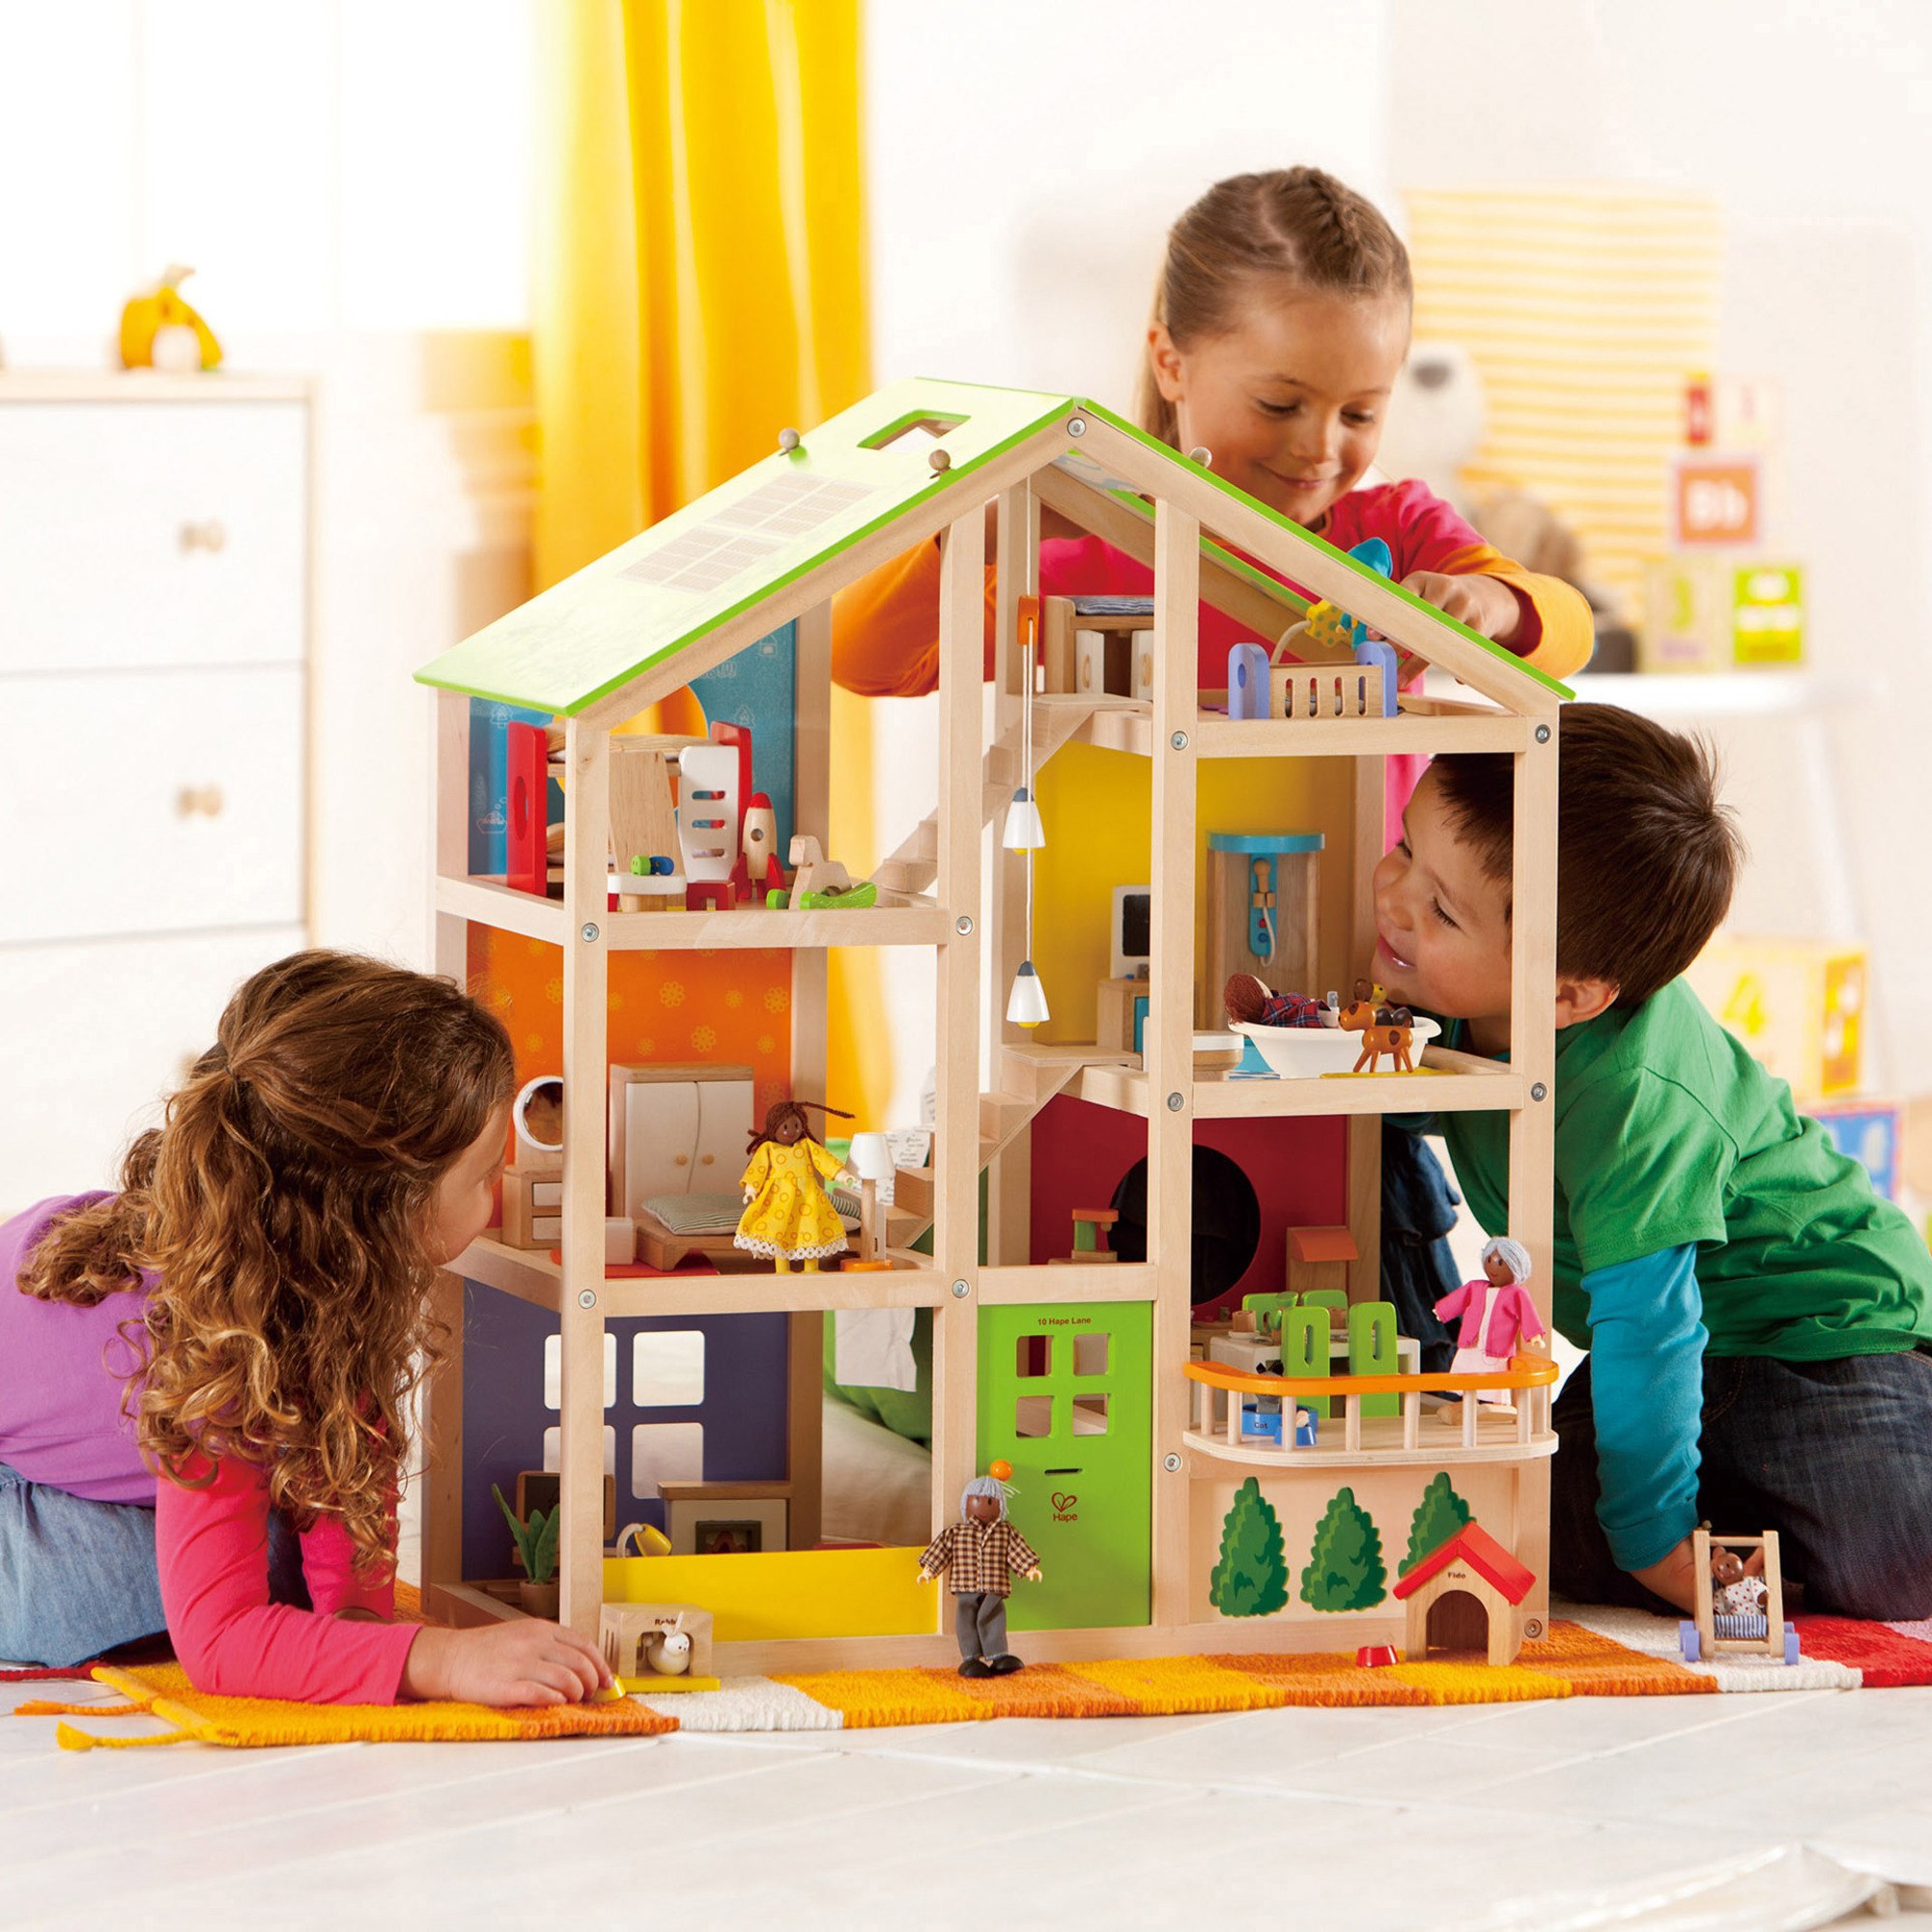 Hape All Seasons Wooden Furnished Dollhouse Playset - image 5 of 6